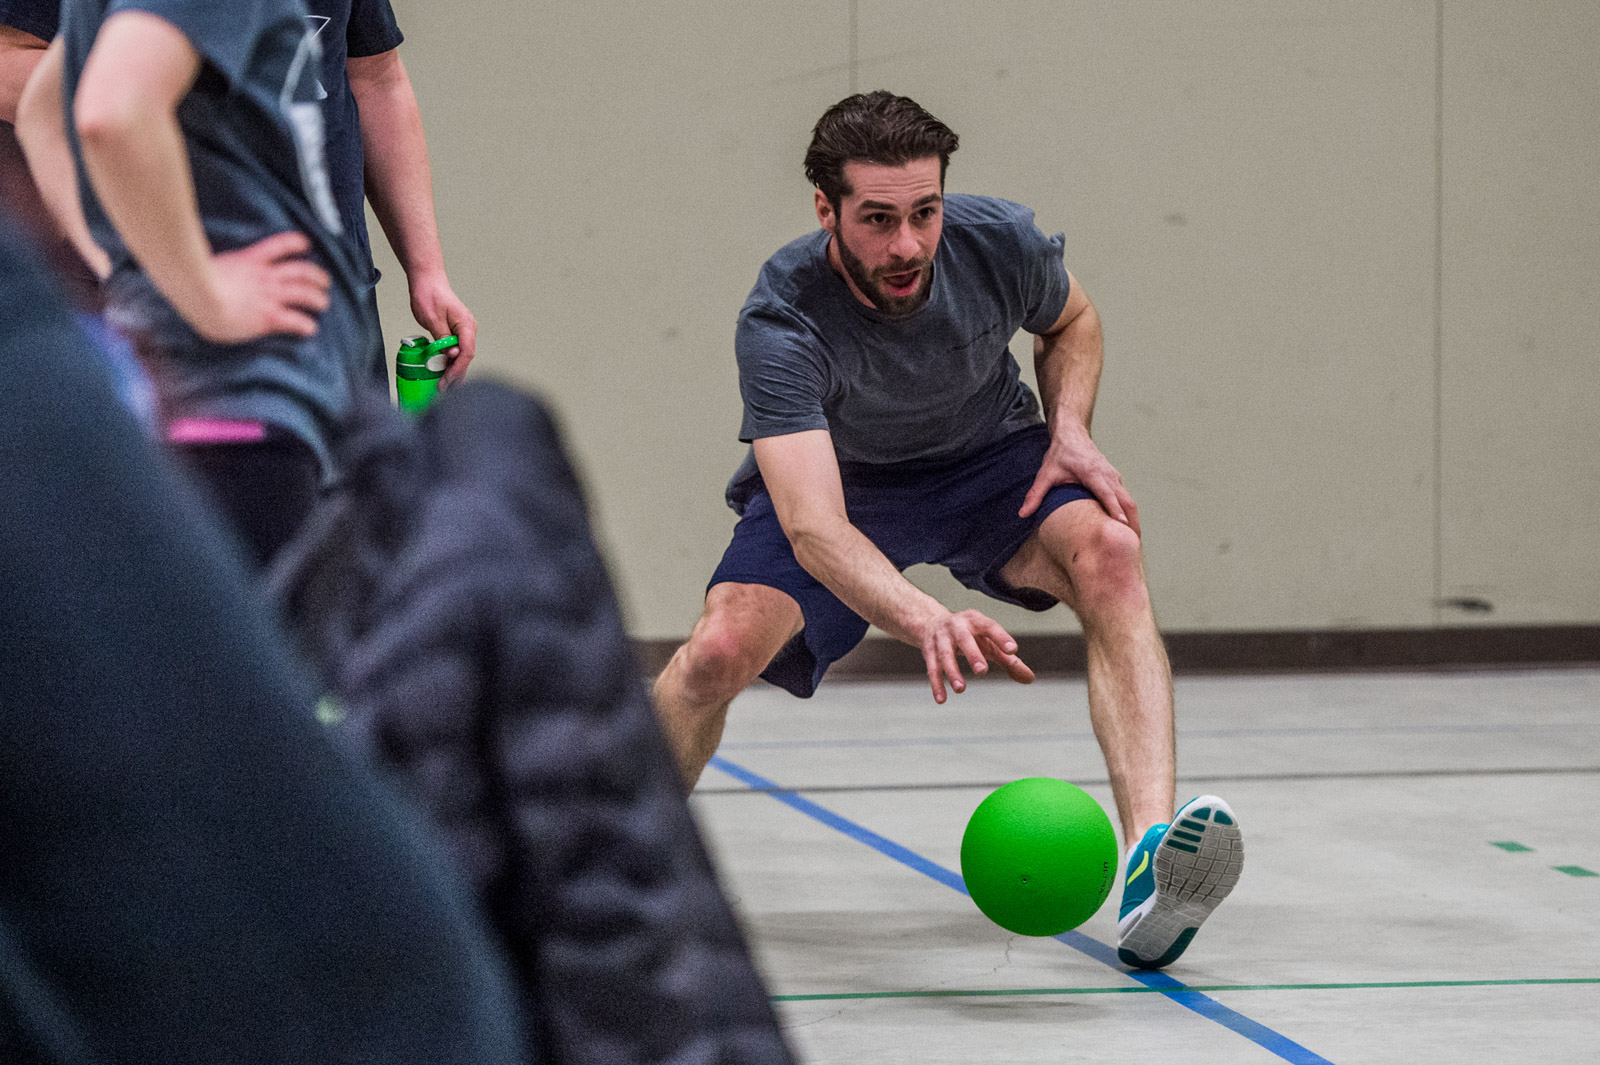 Dodgeball player reaching for a ball.